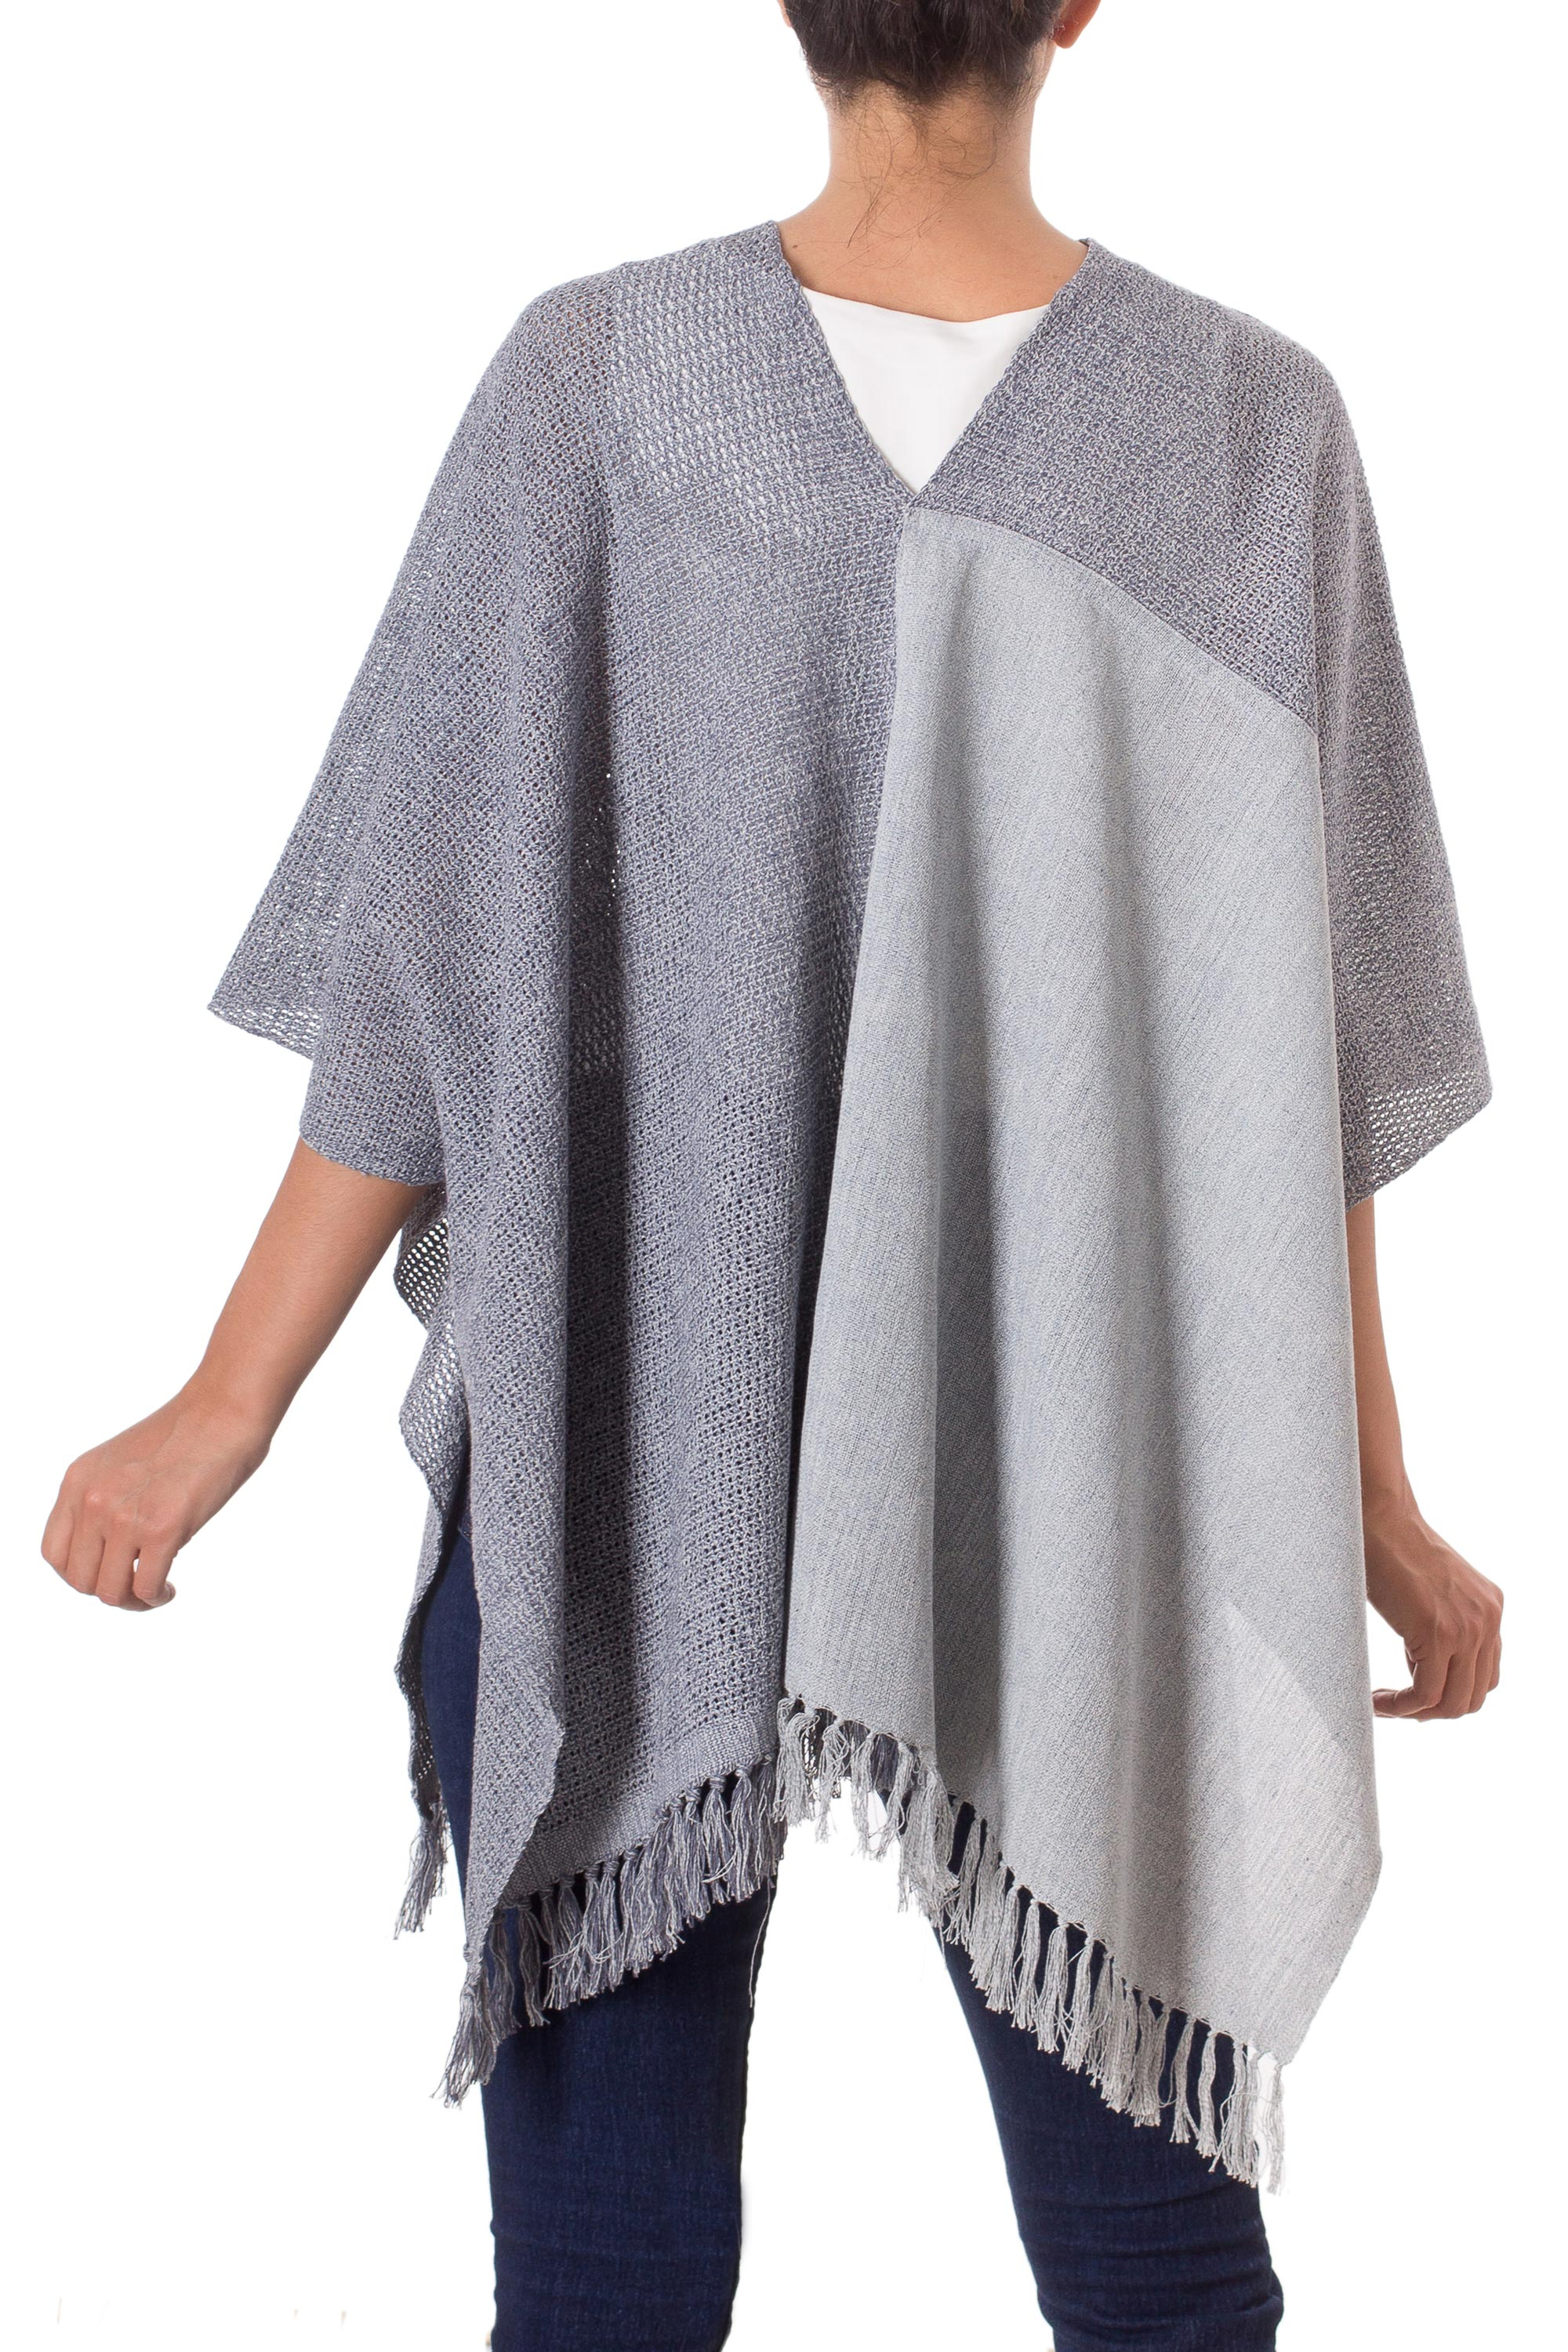 UNICEF Market | Guatemalan Handwoven Natural and Recycled Cotton Poncho ...